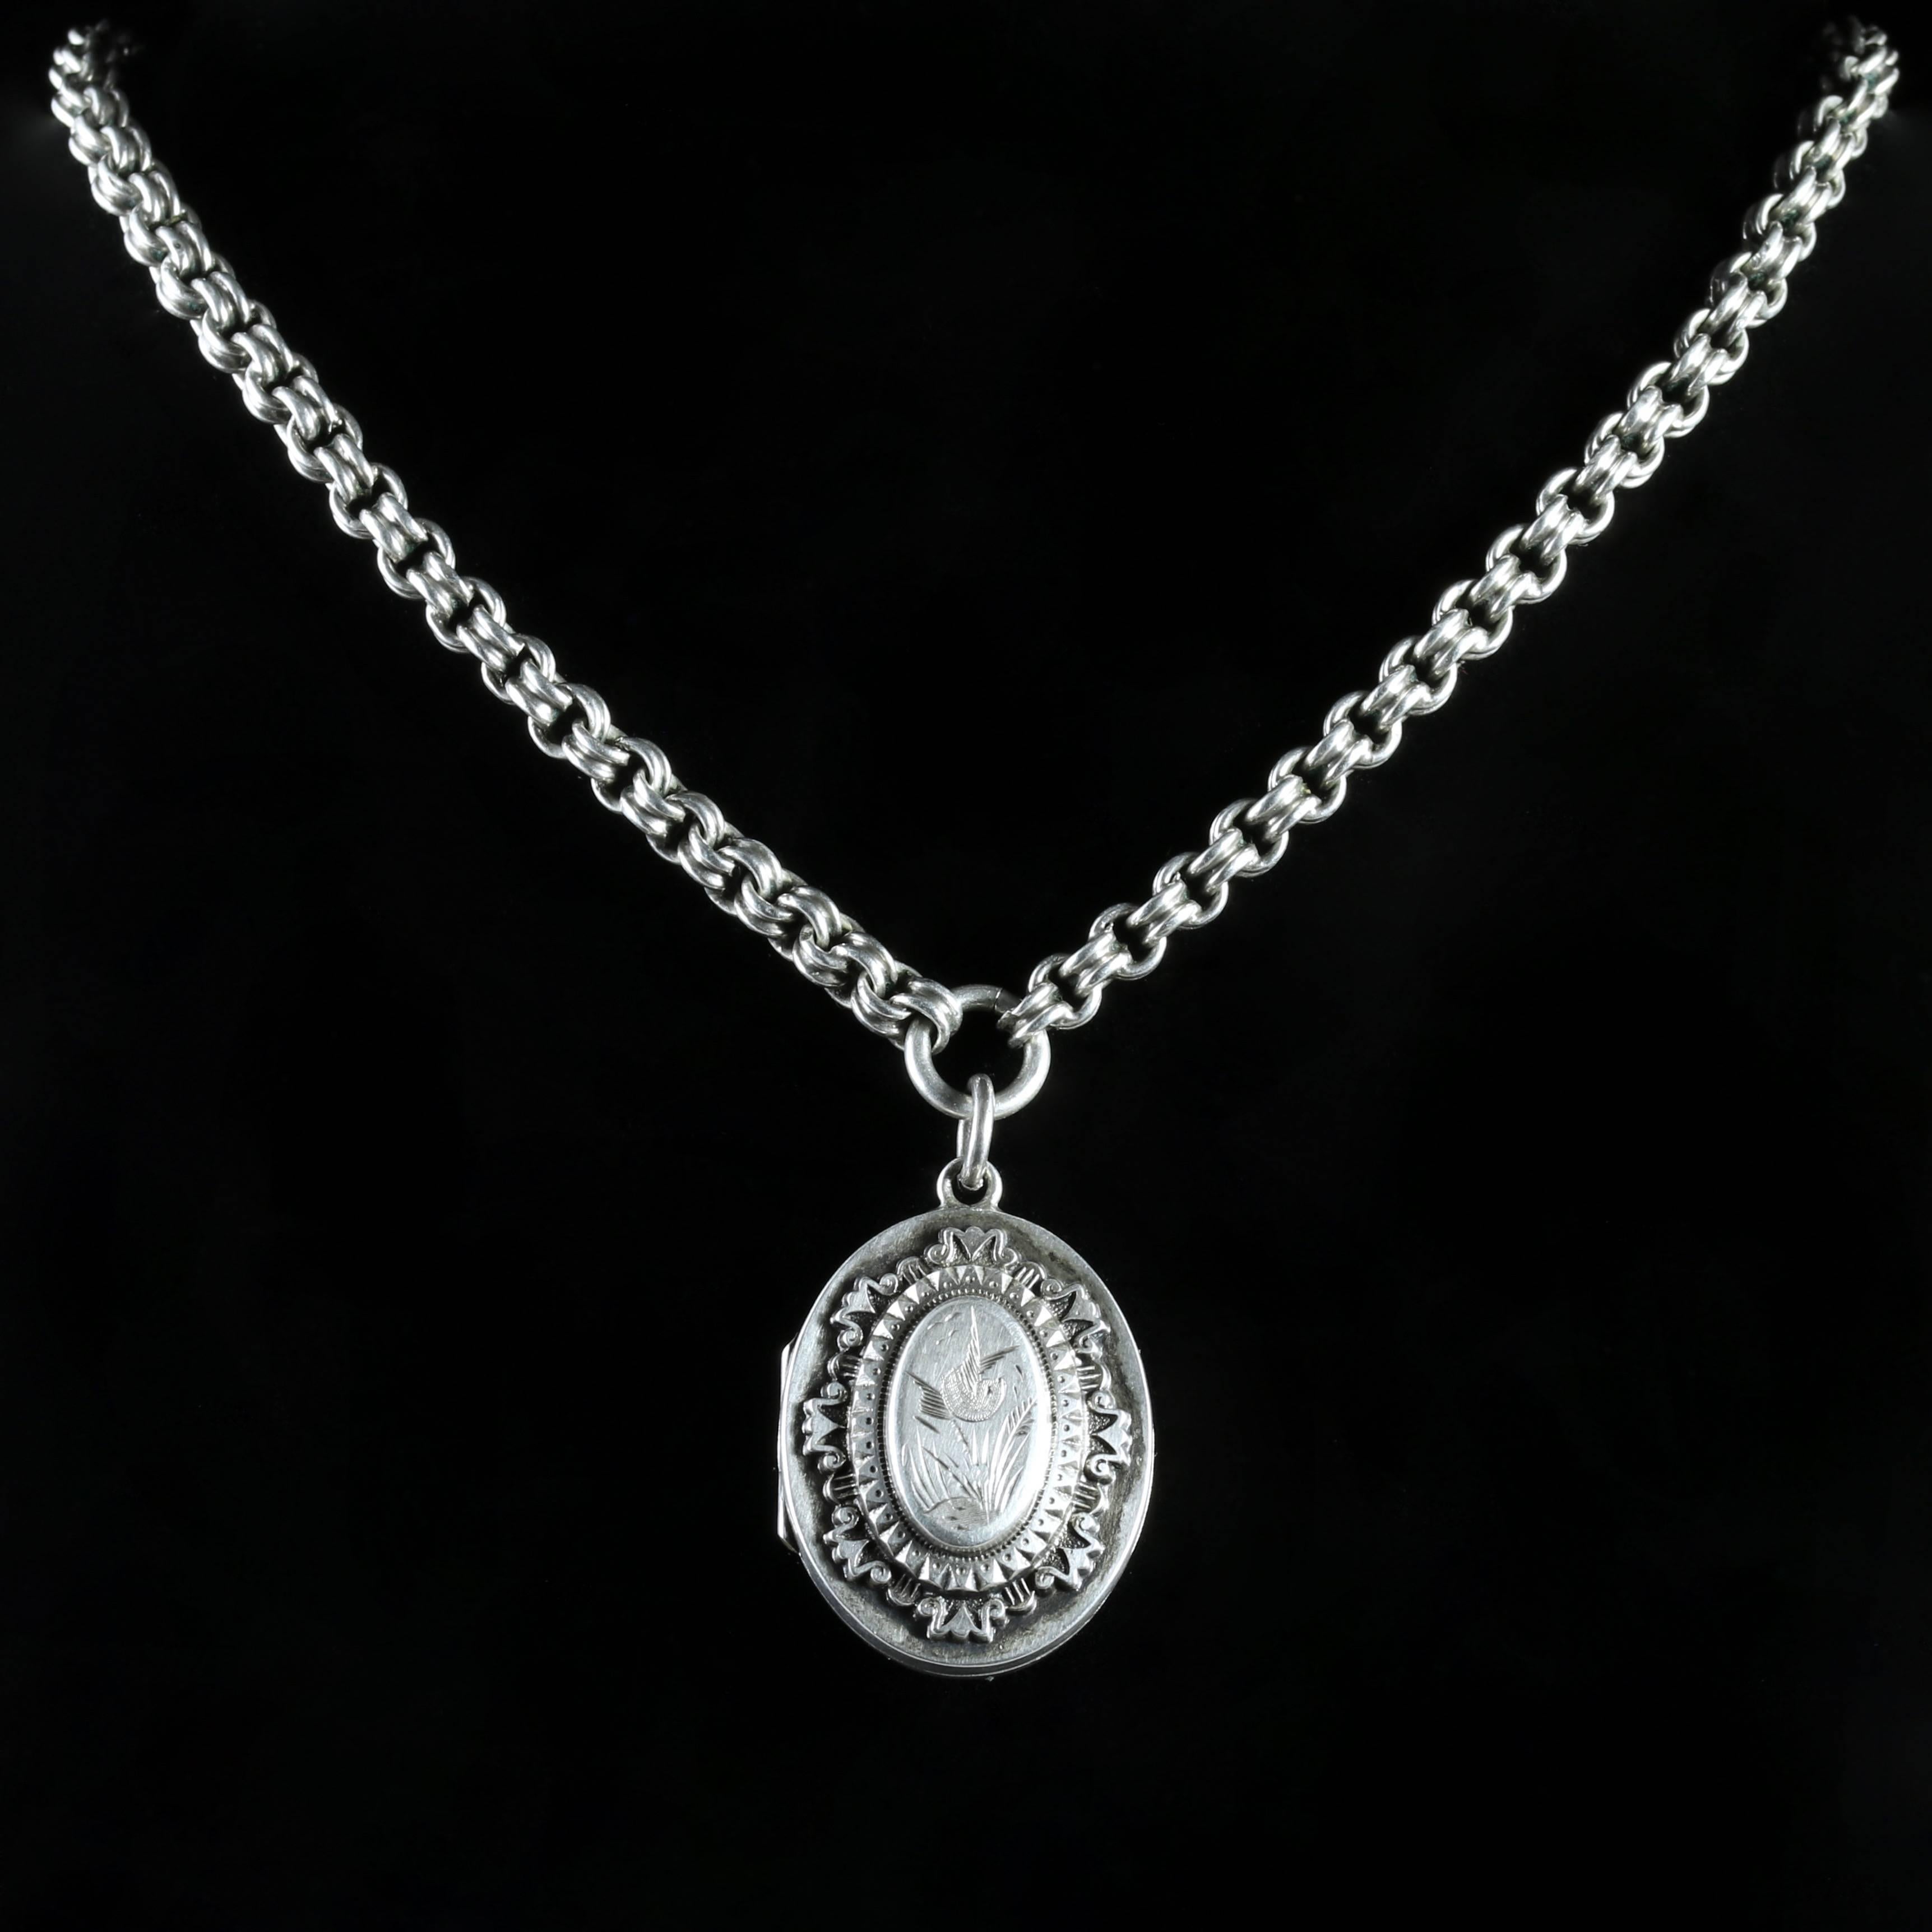 For more details please click continue reading down below..

This fabulous Sterling Silver Victorian locket and collar is fully hallmarked Birmingham 1884.

The collar is a lovely thick rope linked necklace which leads to a beautiful decorative